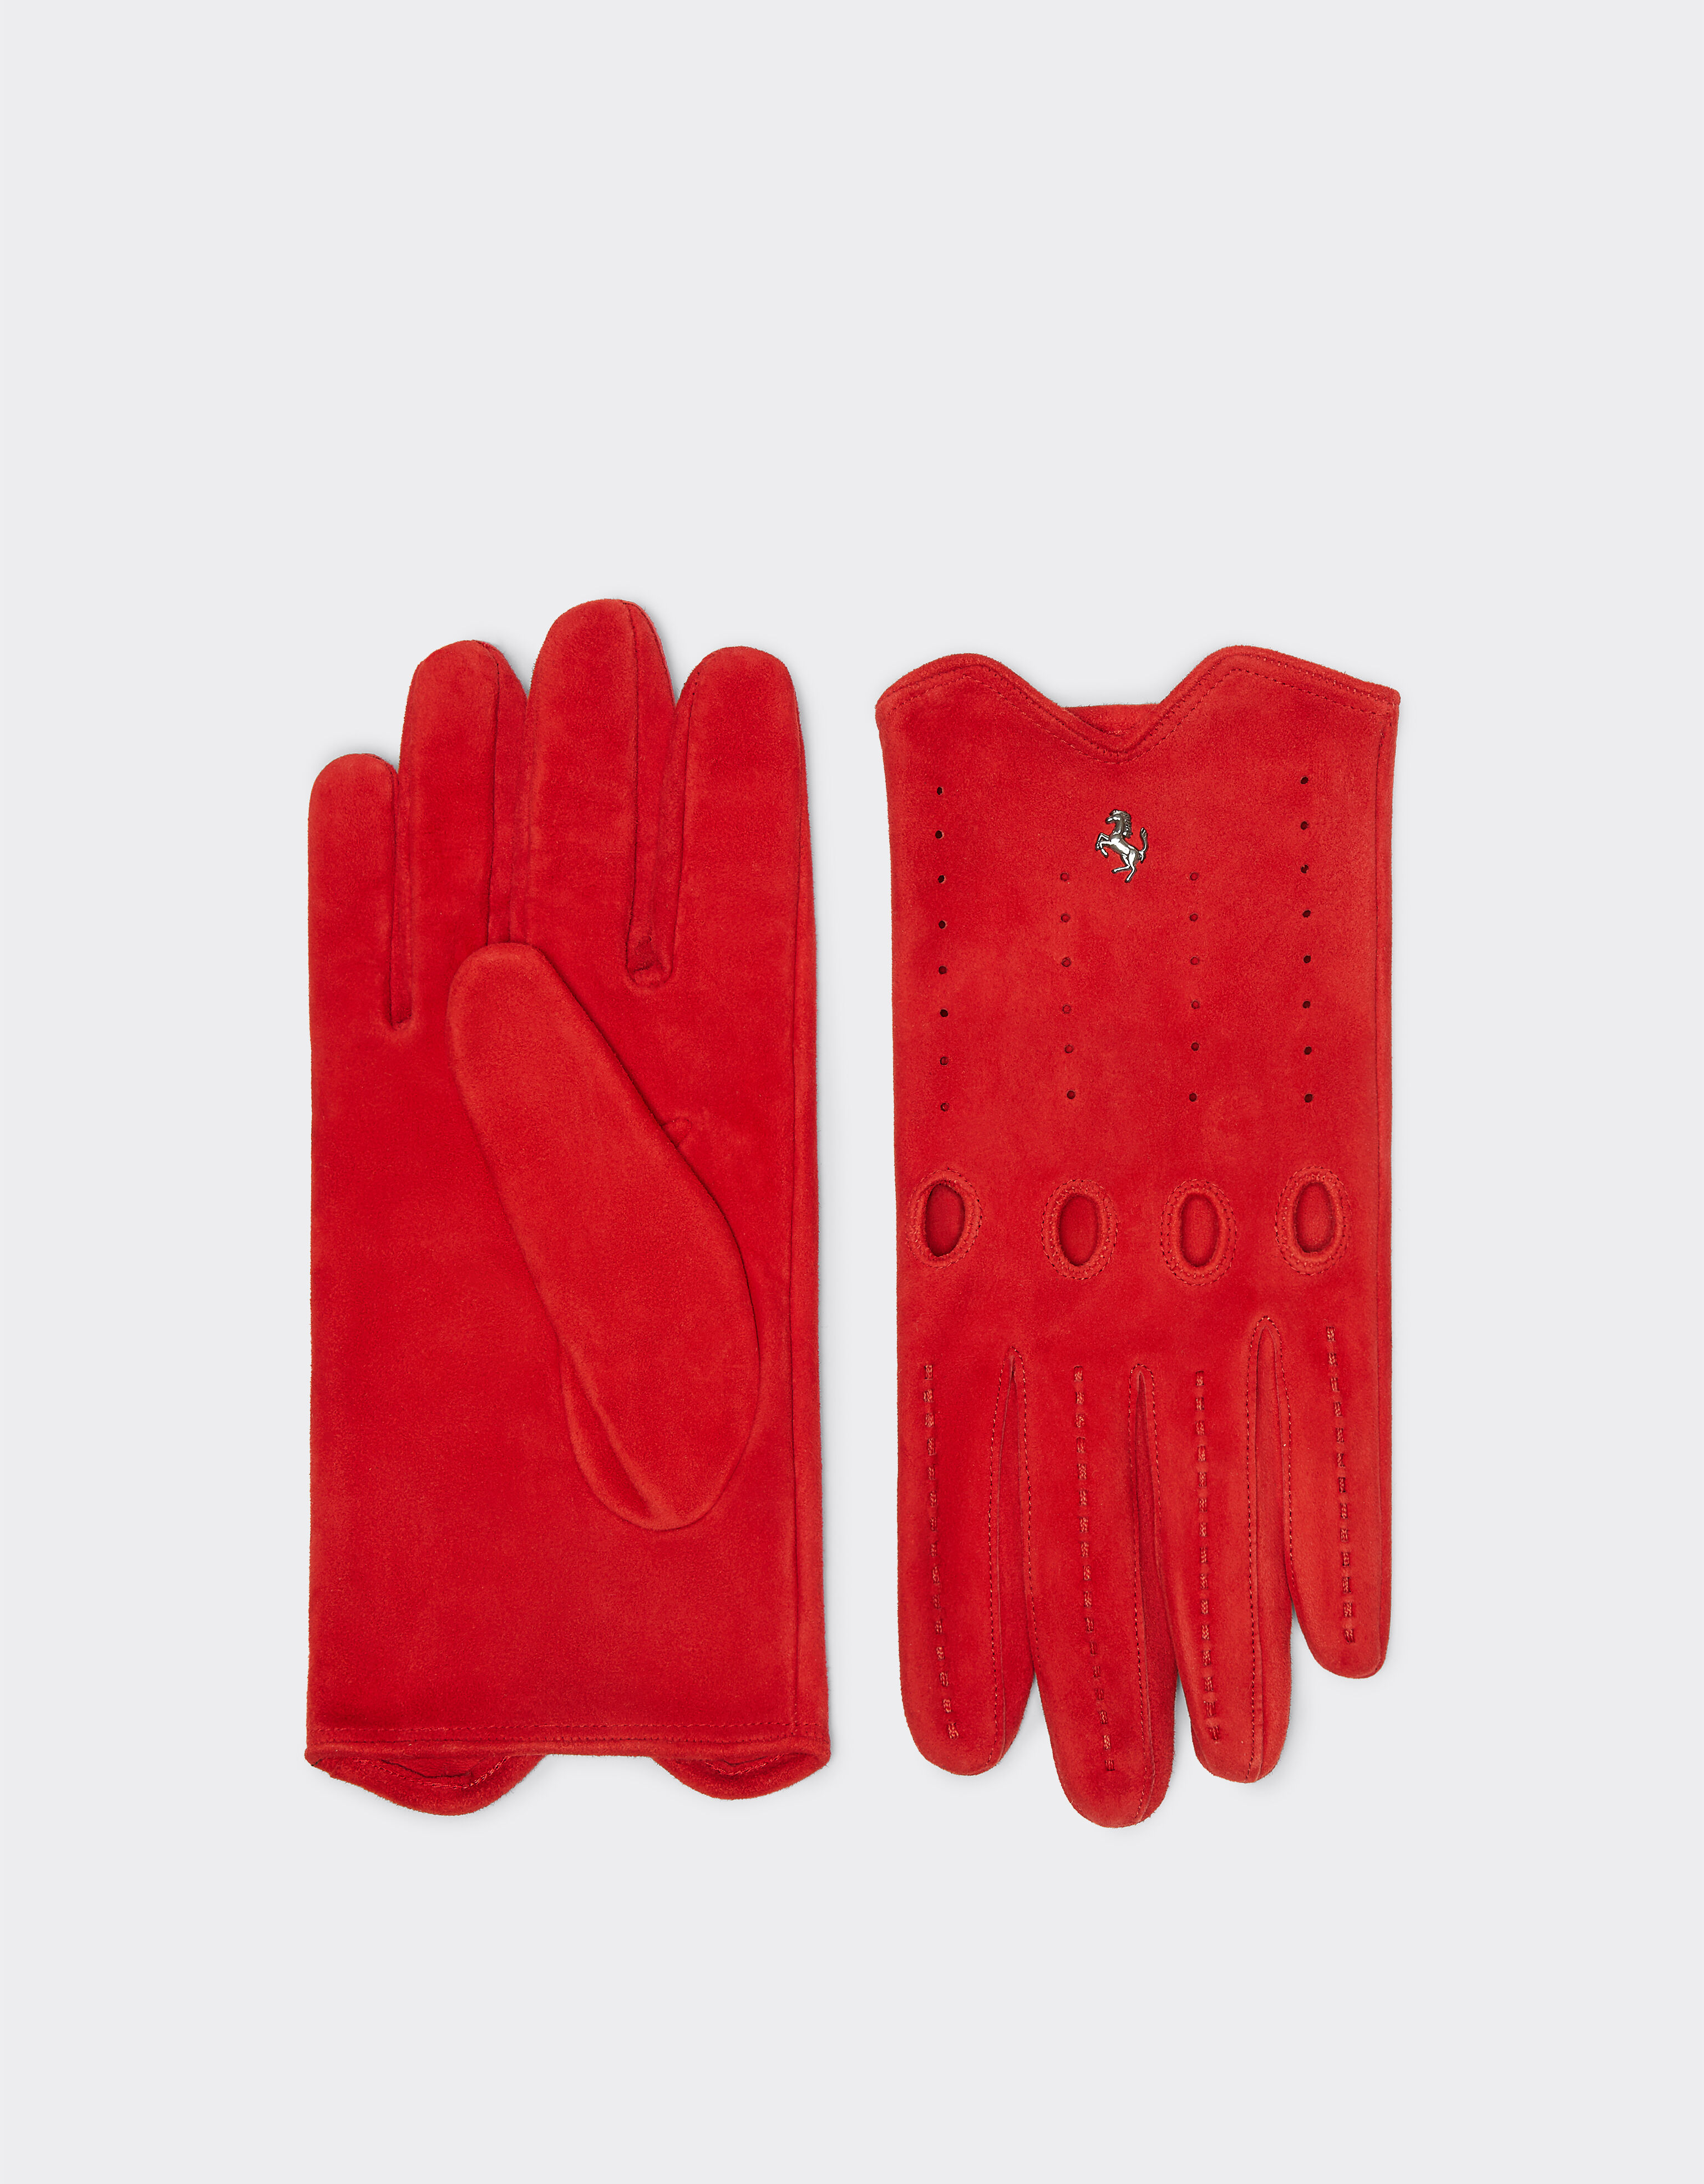 Ferrari Driving gloves in nappa leather and suede Rosso Corsa 47431f